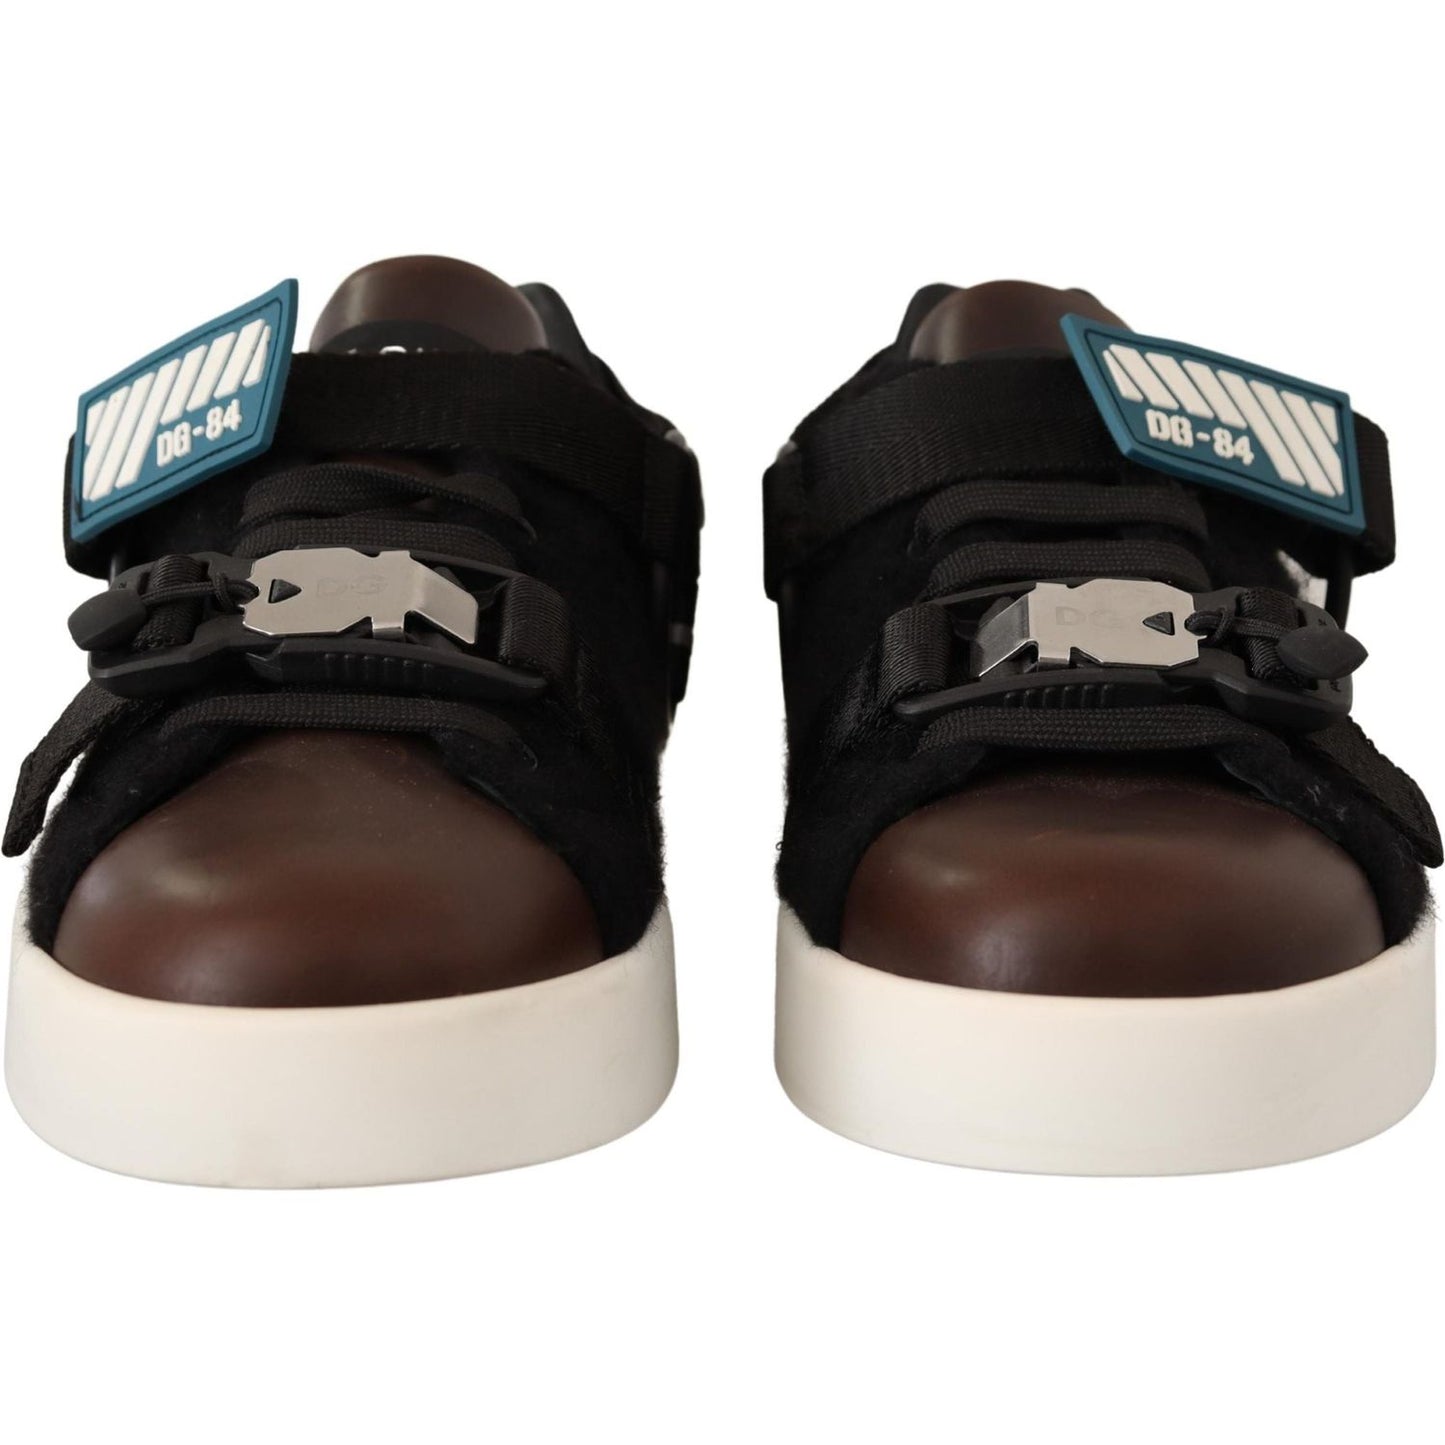 Dolce & Gabbana Shearling-Trimmed Leather Sneakers brown-leather-black-shearling-sneakers IMG_9275-scaled-19a81d26-52e.jpg